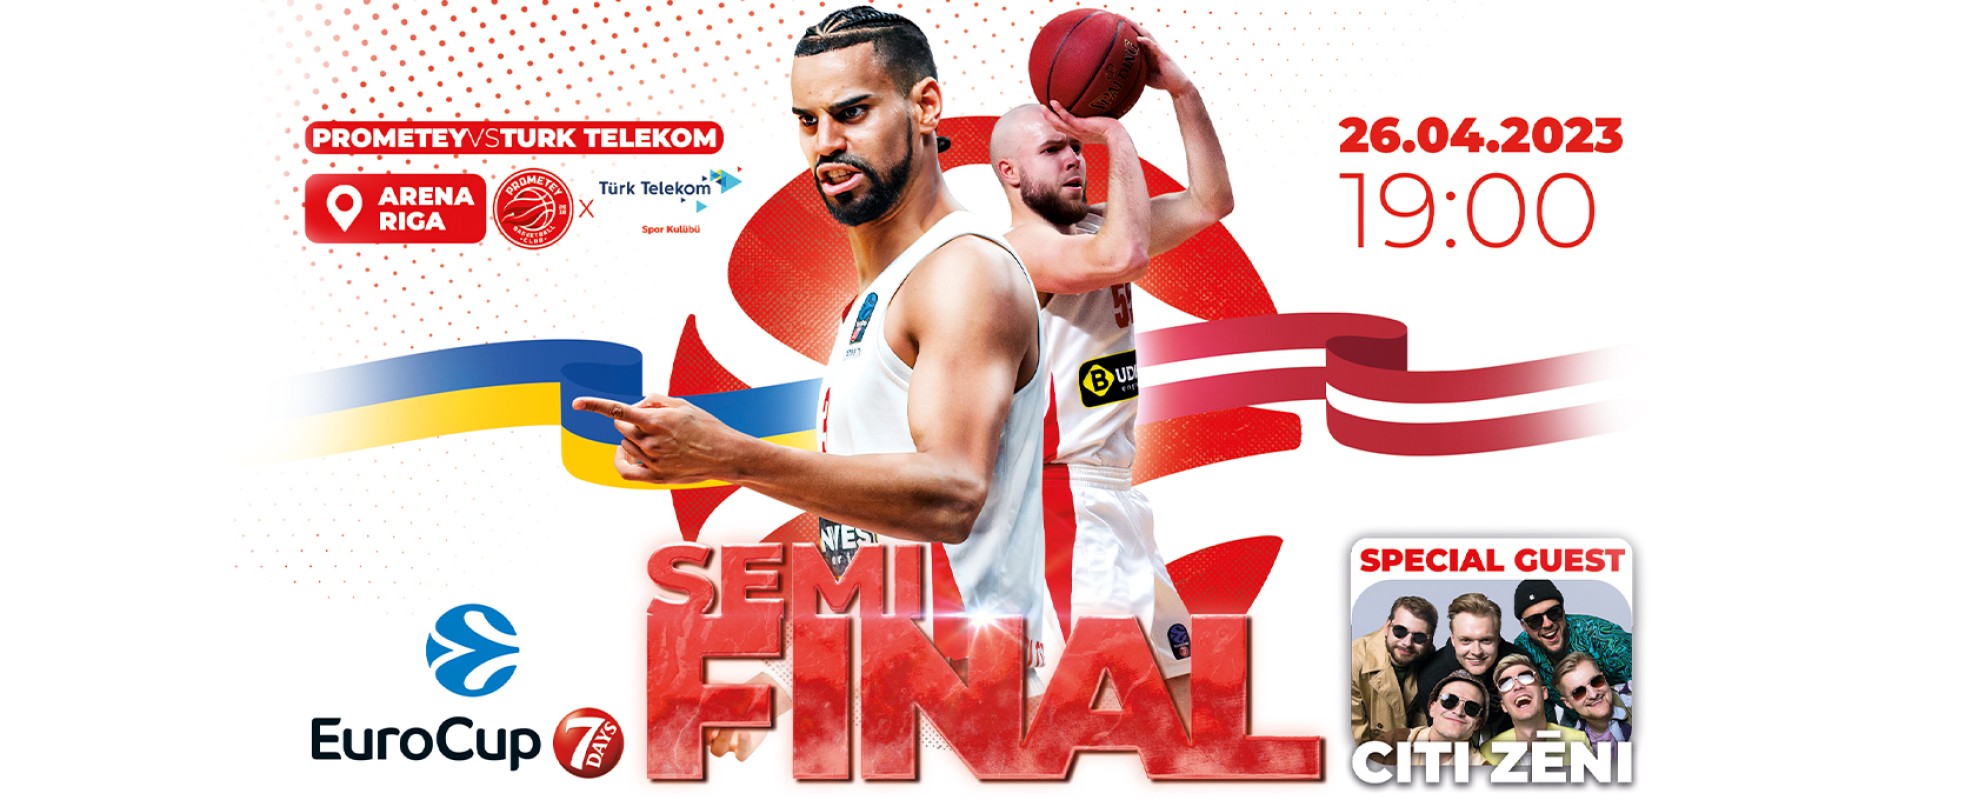 Tickets for the 7DAYS EuroCup semifinal 2022/2023 seaso in Riga are